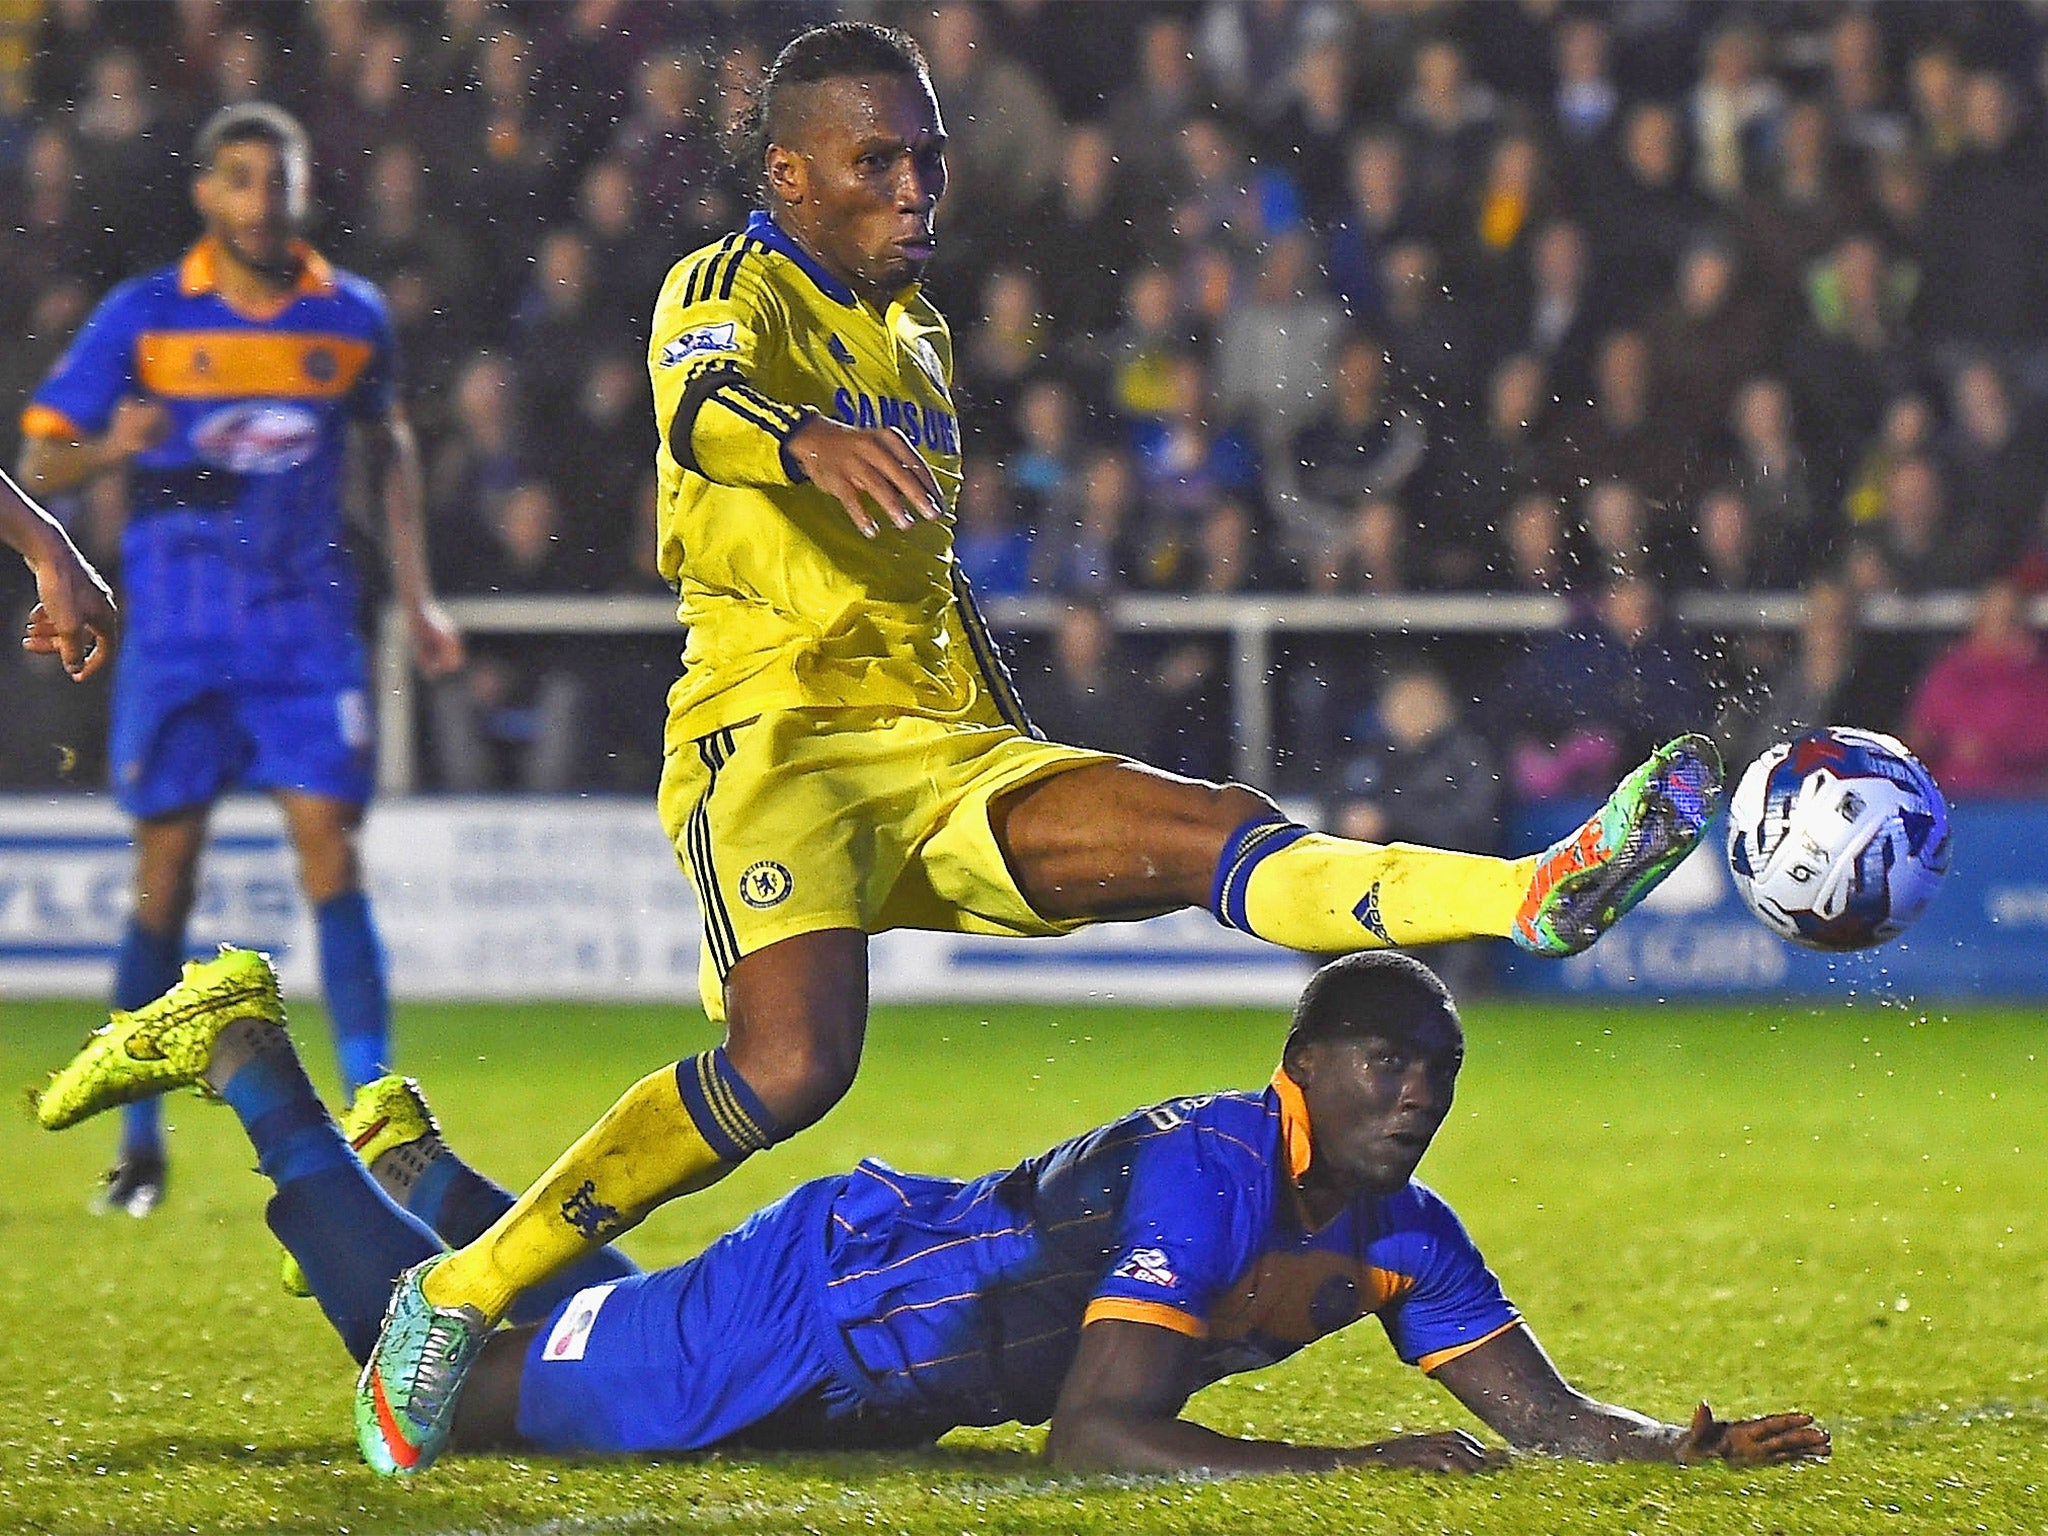 Jermaine Grandison heads into his own net under pressure from Didier Drogba